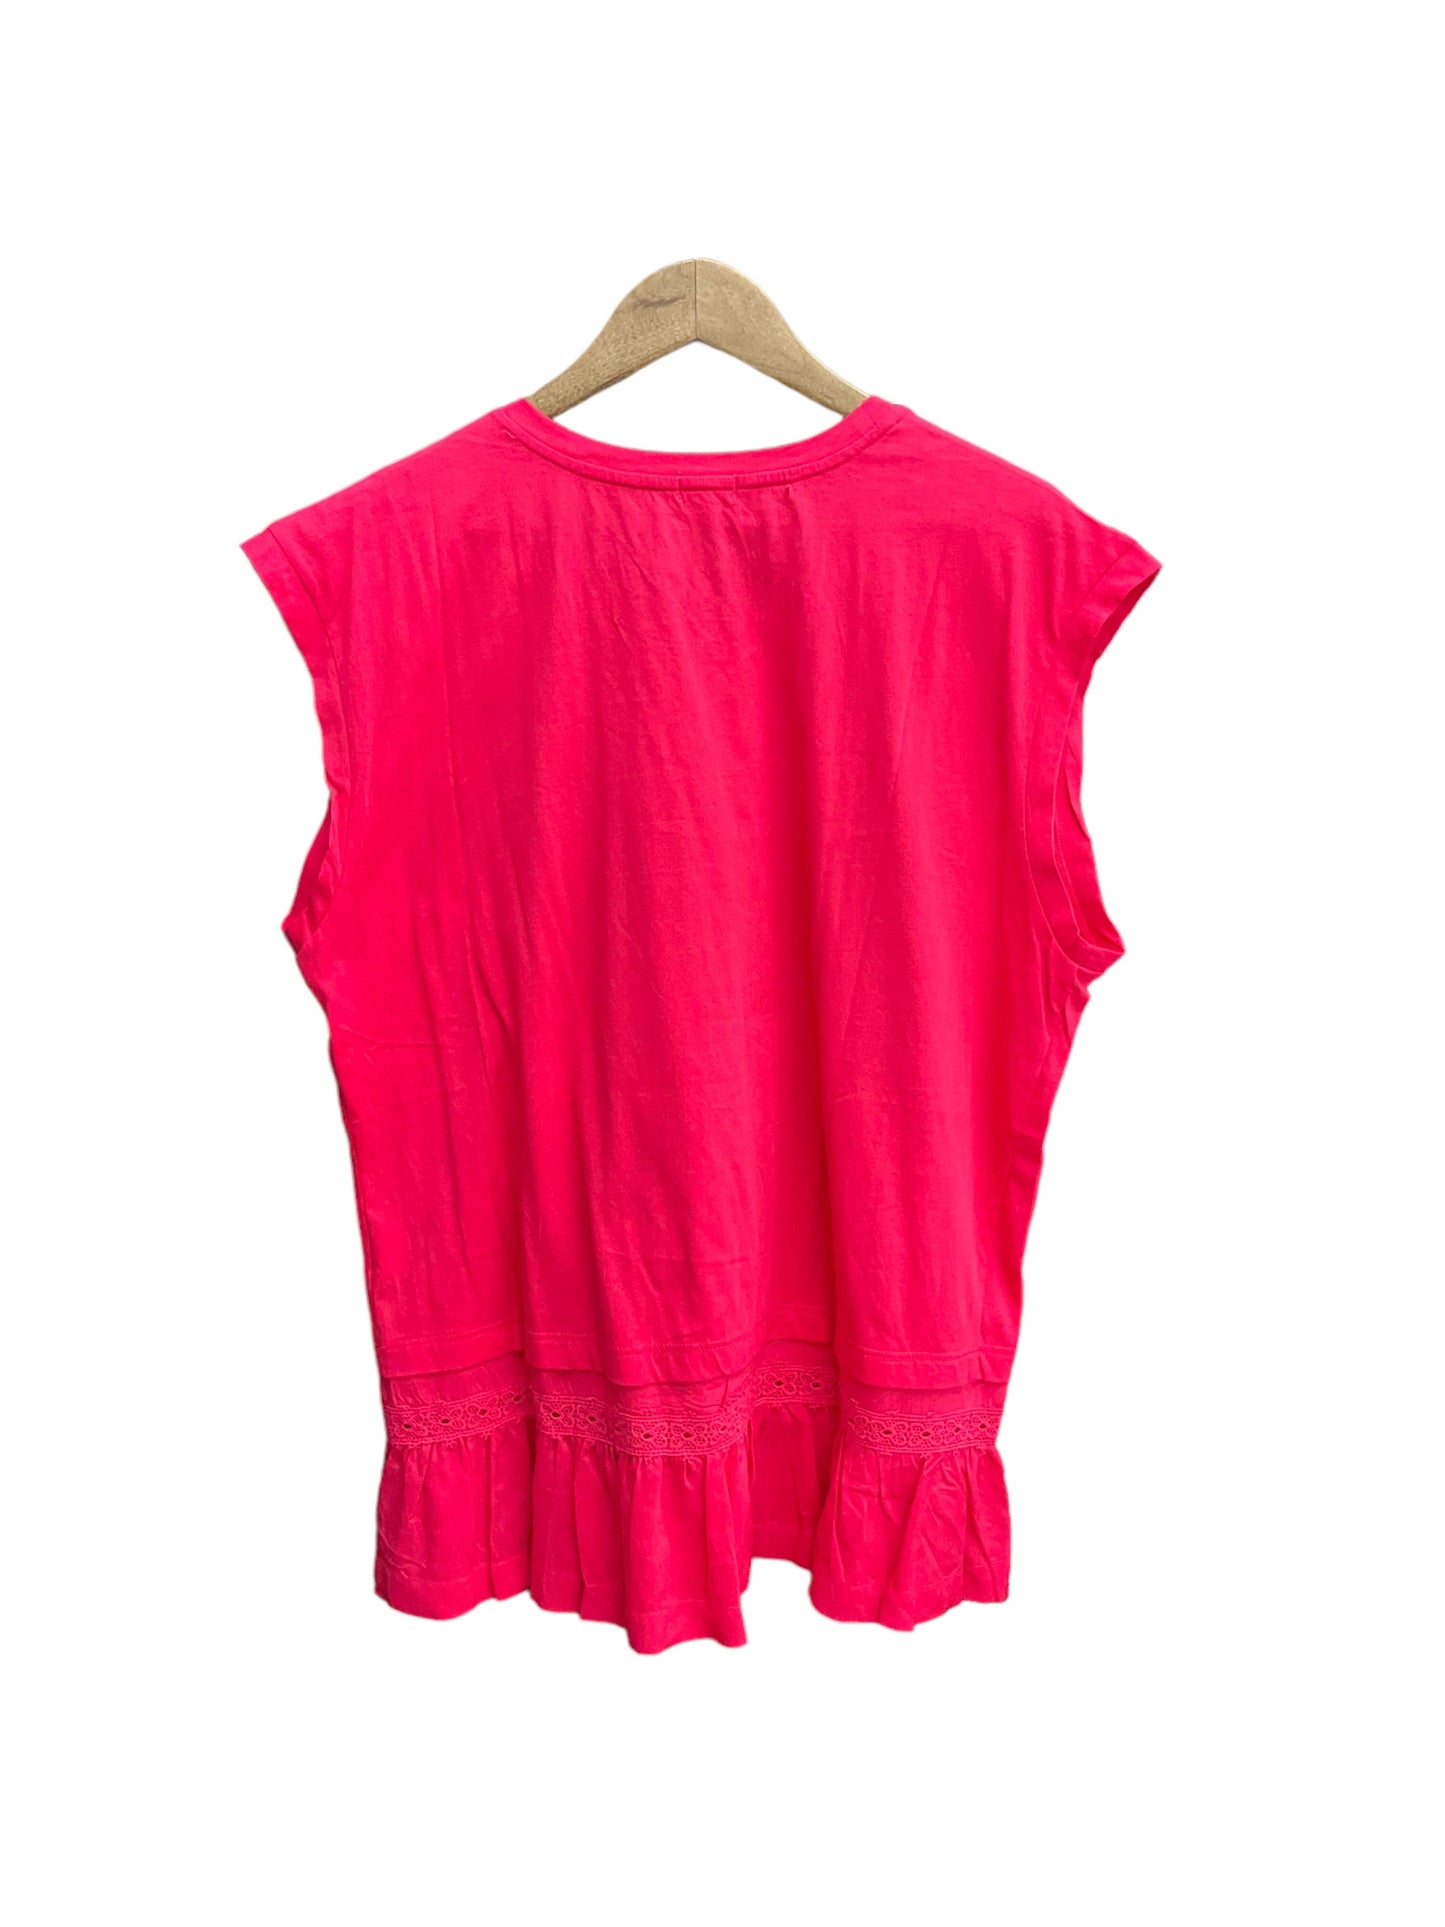 Top Sleeveless By Tiny  Size: L